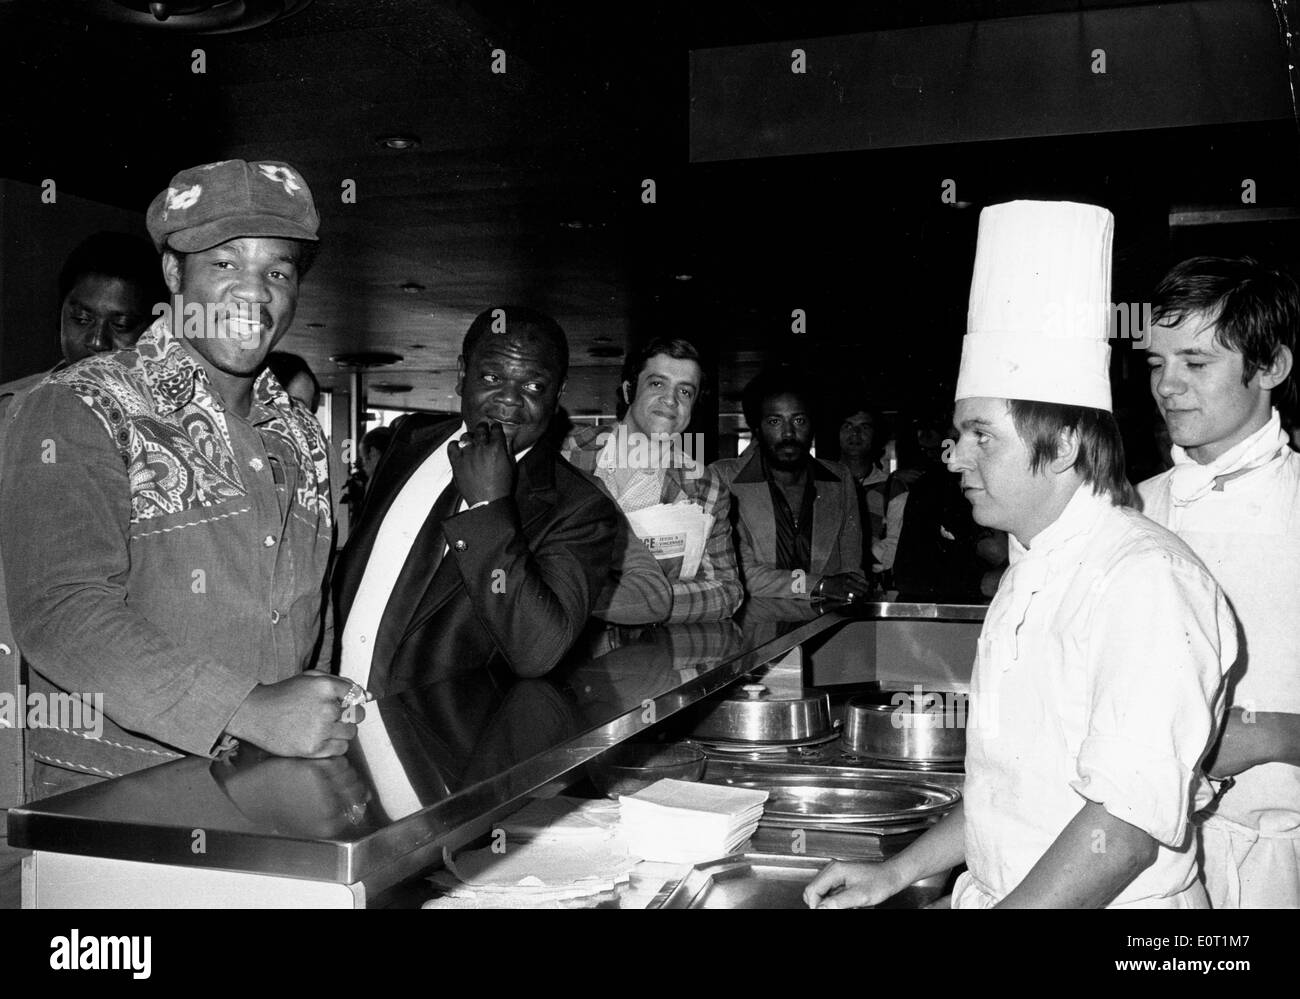 Boxer George Foreman talking with chef at restaurant Stock Photo